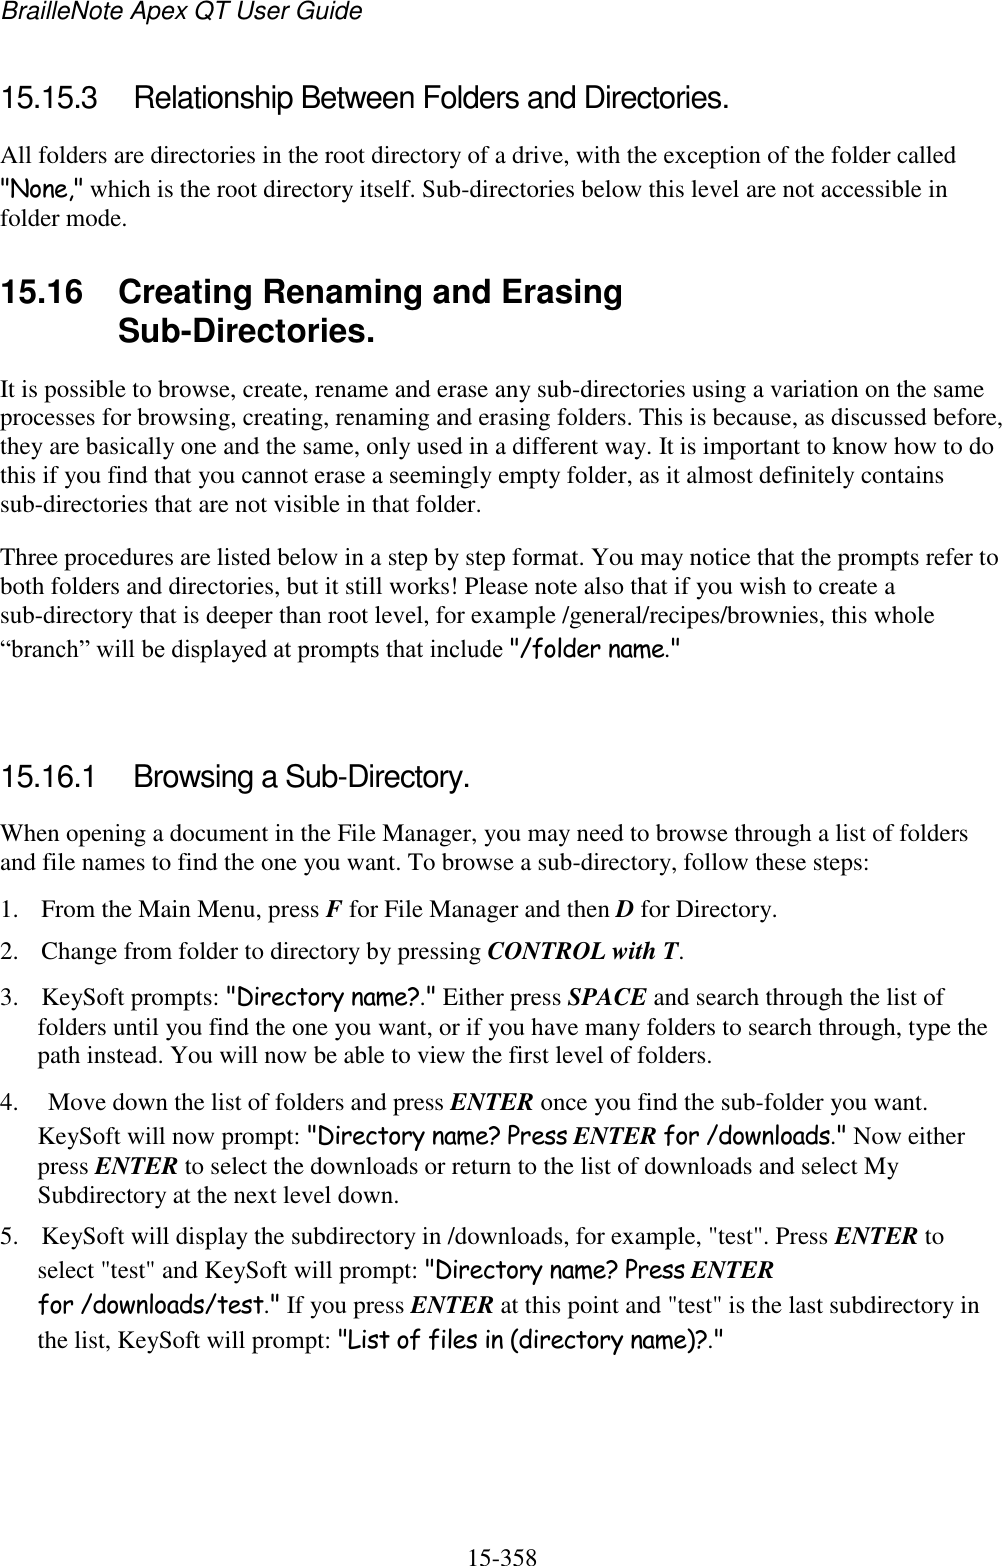 BrailleNote Apex QT User Guide  15-358   15.15.3  Relationship Between Folders and Directories. All folders are directories in the root directory of a drive, with the exception of the folder called &quot;None,&quot; which is the root directory itself. Sub-directories below this level are not accessible in folder mode.  15.16  Creating Renaming and Erasing Sub-Directories. It is possible to browse, create, rename and erase any sub-directories using a variation on the same processes for browsing, creating, renaming and erasing folders. This is because, as discussed before, they are basically one and the same, only used in a different way. It is important to know how to do this if you find that you cannot erase a seemingly empty folder, as it almost definitely contains sub-directories that are not visible in that folder. Three procedures are listed below in a step by step format. You may notice that the prompts refer to both folders and directories, but it still works! Please note also that if you wish to create a sub-directory that is deeper than root level, for example /general/recipes/brownies, this whole “branch” will be displayed at prompts that include &quot;/folder name.&quot;   15.16.1  Browsing a Sub-Directory. When opening a document in the File Manager, you may need to browse through a list of folders and file names to find the one you want. To browse a sub-directory, follow these steps: 1. From the Main Menu, press F for File Manager and then D for Directory. 2. Change from folder to directory by pressing CONTROL with T. 3. KeySoft prompts: &quot;Directory name?.&quot; Either press SPACE and search through the list of folders until you find the one you want, or if you have many folders to search through, type the path instead. You will now be able to view the first level of folders. 4.  Move down the list of folders and press ENTER once you find the sub-folder you want. KeySoft will now prompt: &quot;Directory name? Press ENTER for /downloads.&quot; Now either press ENTER to select the downloads or return to the list of downloads and select My Subdirectory at the next level down.  5. KeySoft will display the subdirectory in /downloads, for example, &quot;test&quot;. Press ENTER to select &quot;test&quot; and KeySoft will prompt: &quot;Directory name? Press ENTER for /downloads/test.&quot; If you press ENTER at this point and &quot;test&quot; is the last subdirectory in the list, KeySoft will prompt: &quot;List of files in (directory name)?.&quot; 